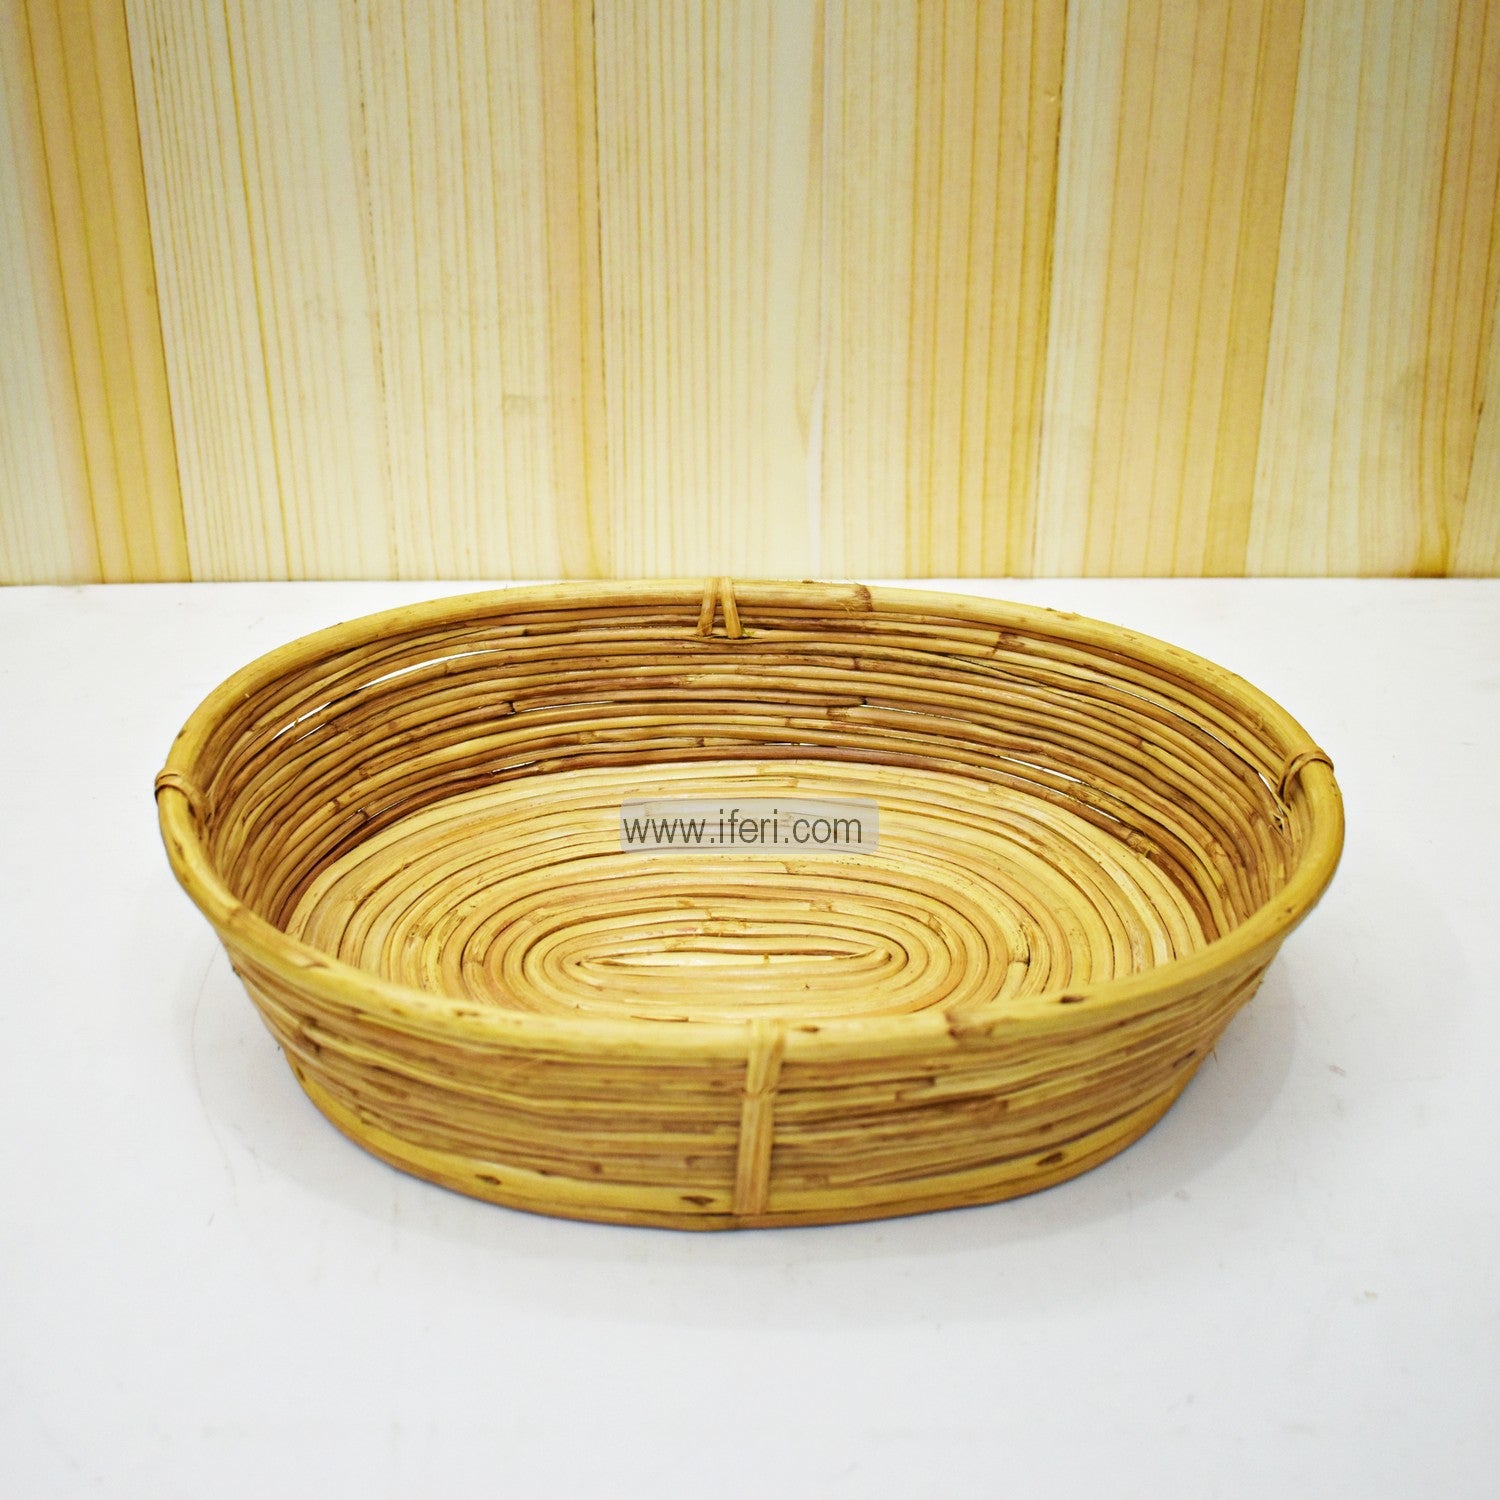 13 inch Oval Bread and Roti Basket for Kitchen and Dining Serving ALF0975